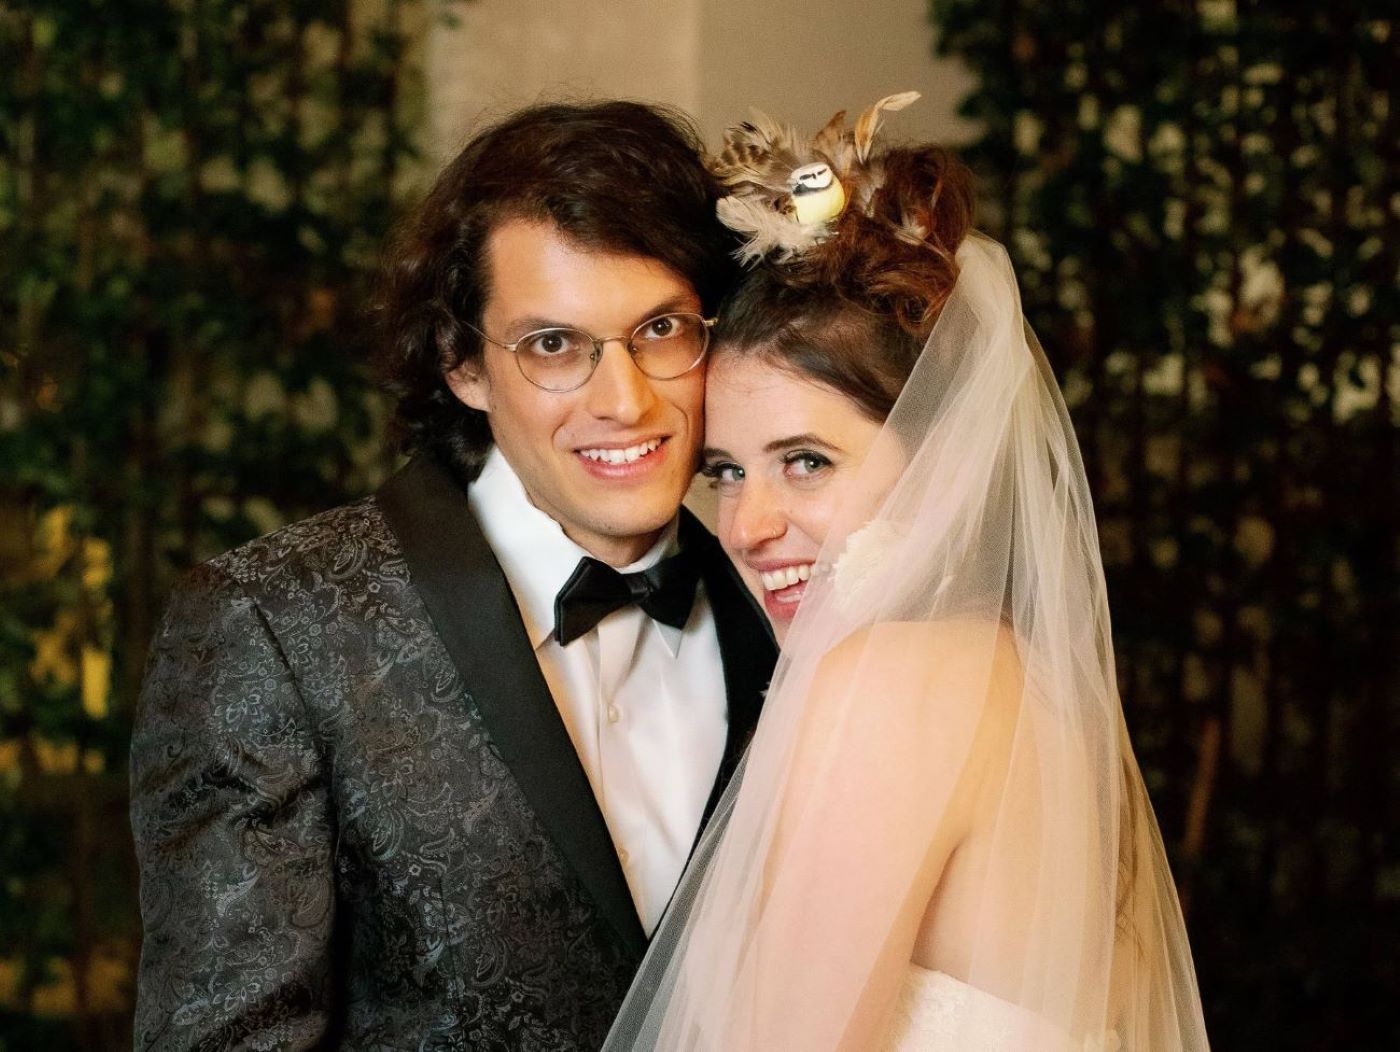 Smiling photo of Bennett and Amelia from 'Married at First Sight' on their wedding day.